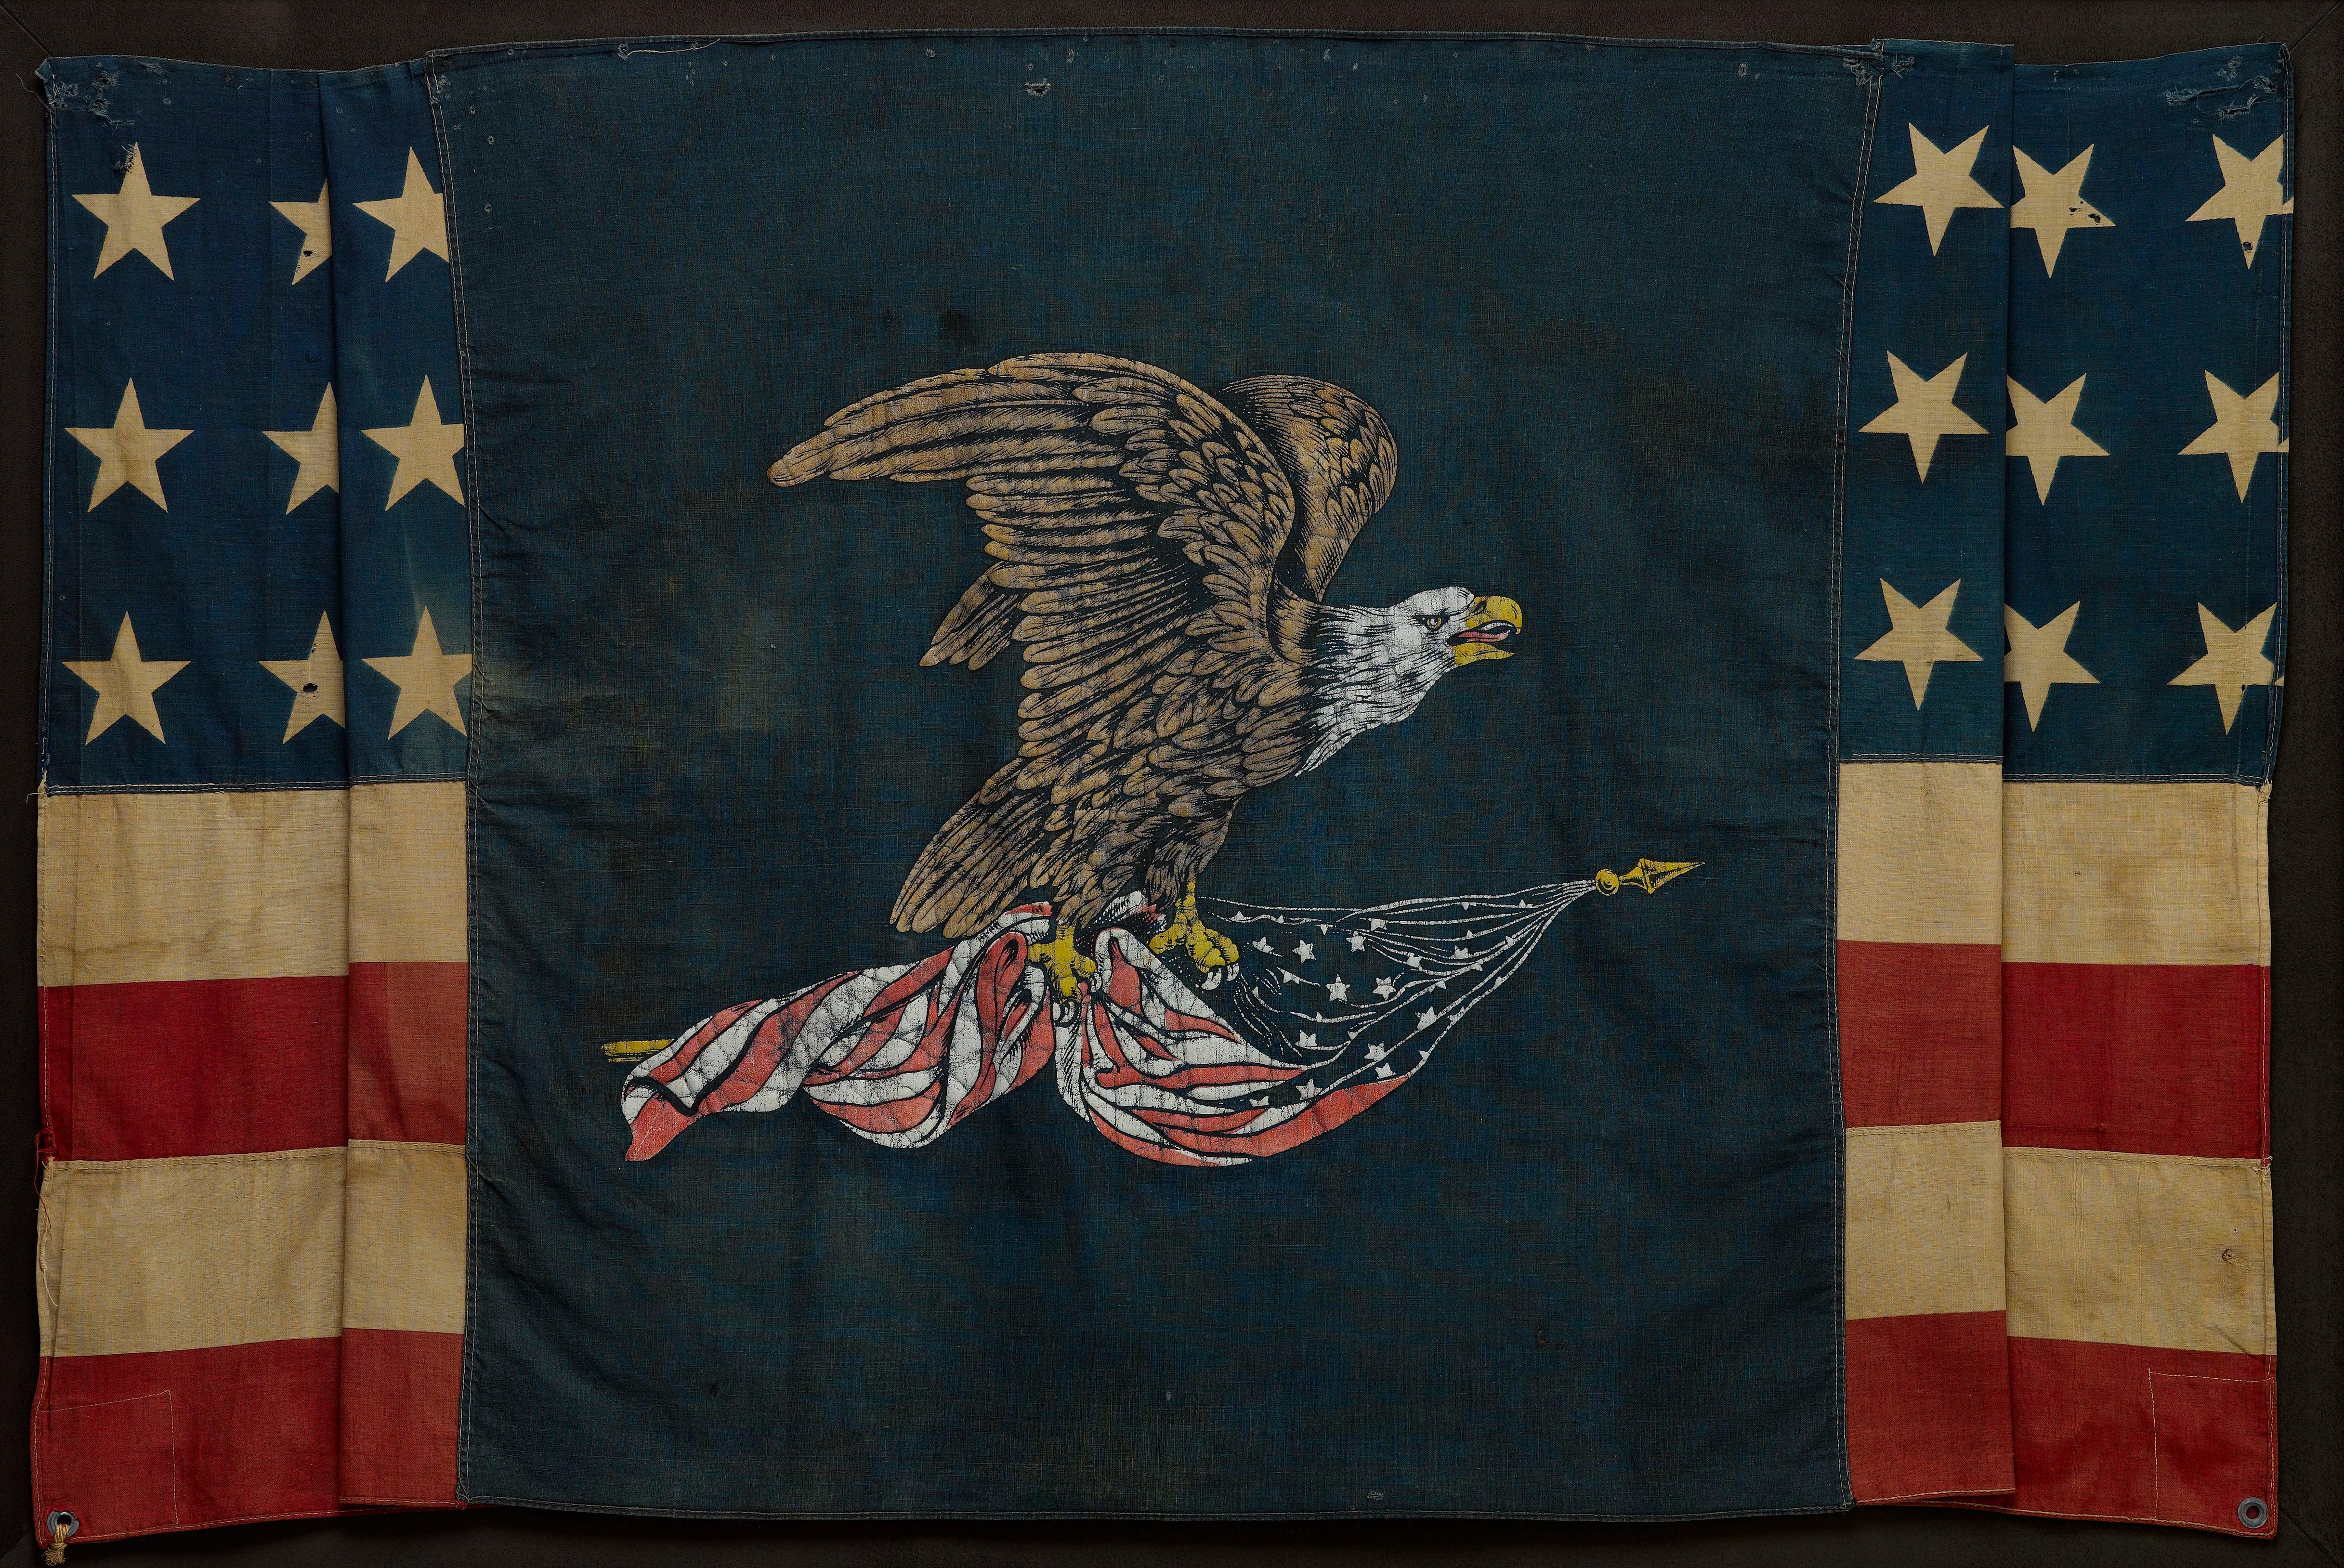 Presented is a stunning, 39-star patriotic banner commemorating North Dakota statehood. A large and dramatic polychrome eagle is printed on the center of a dark blue cotton field. The bald eagle is depicted mid-flight and clutches an American flag